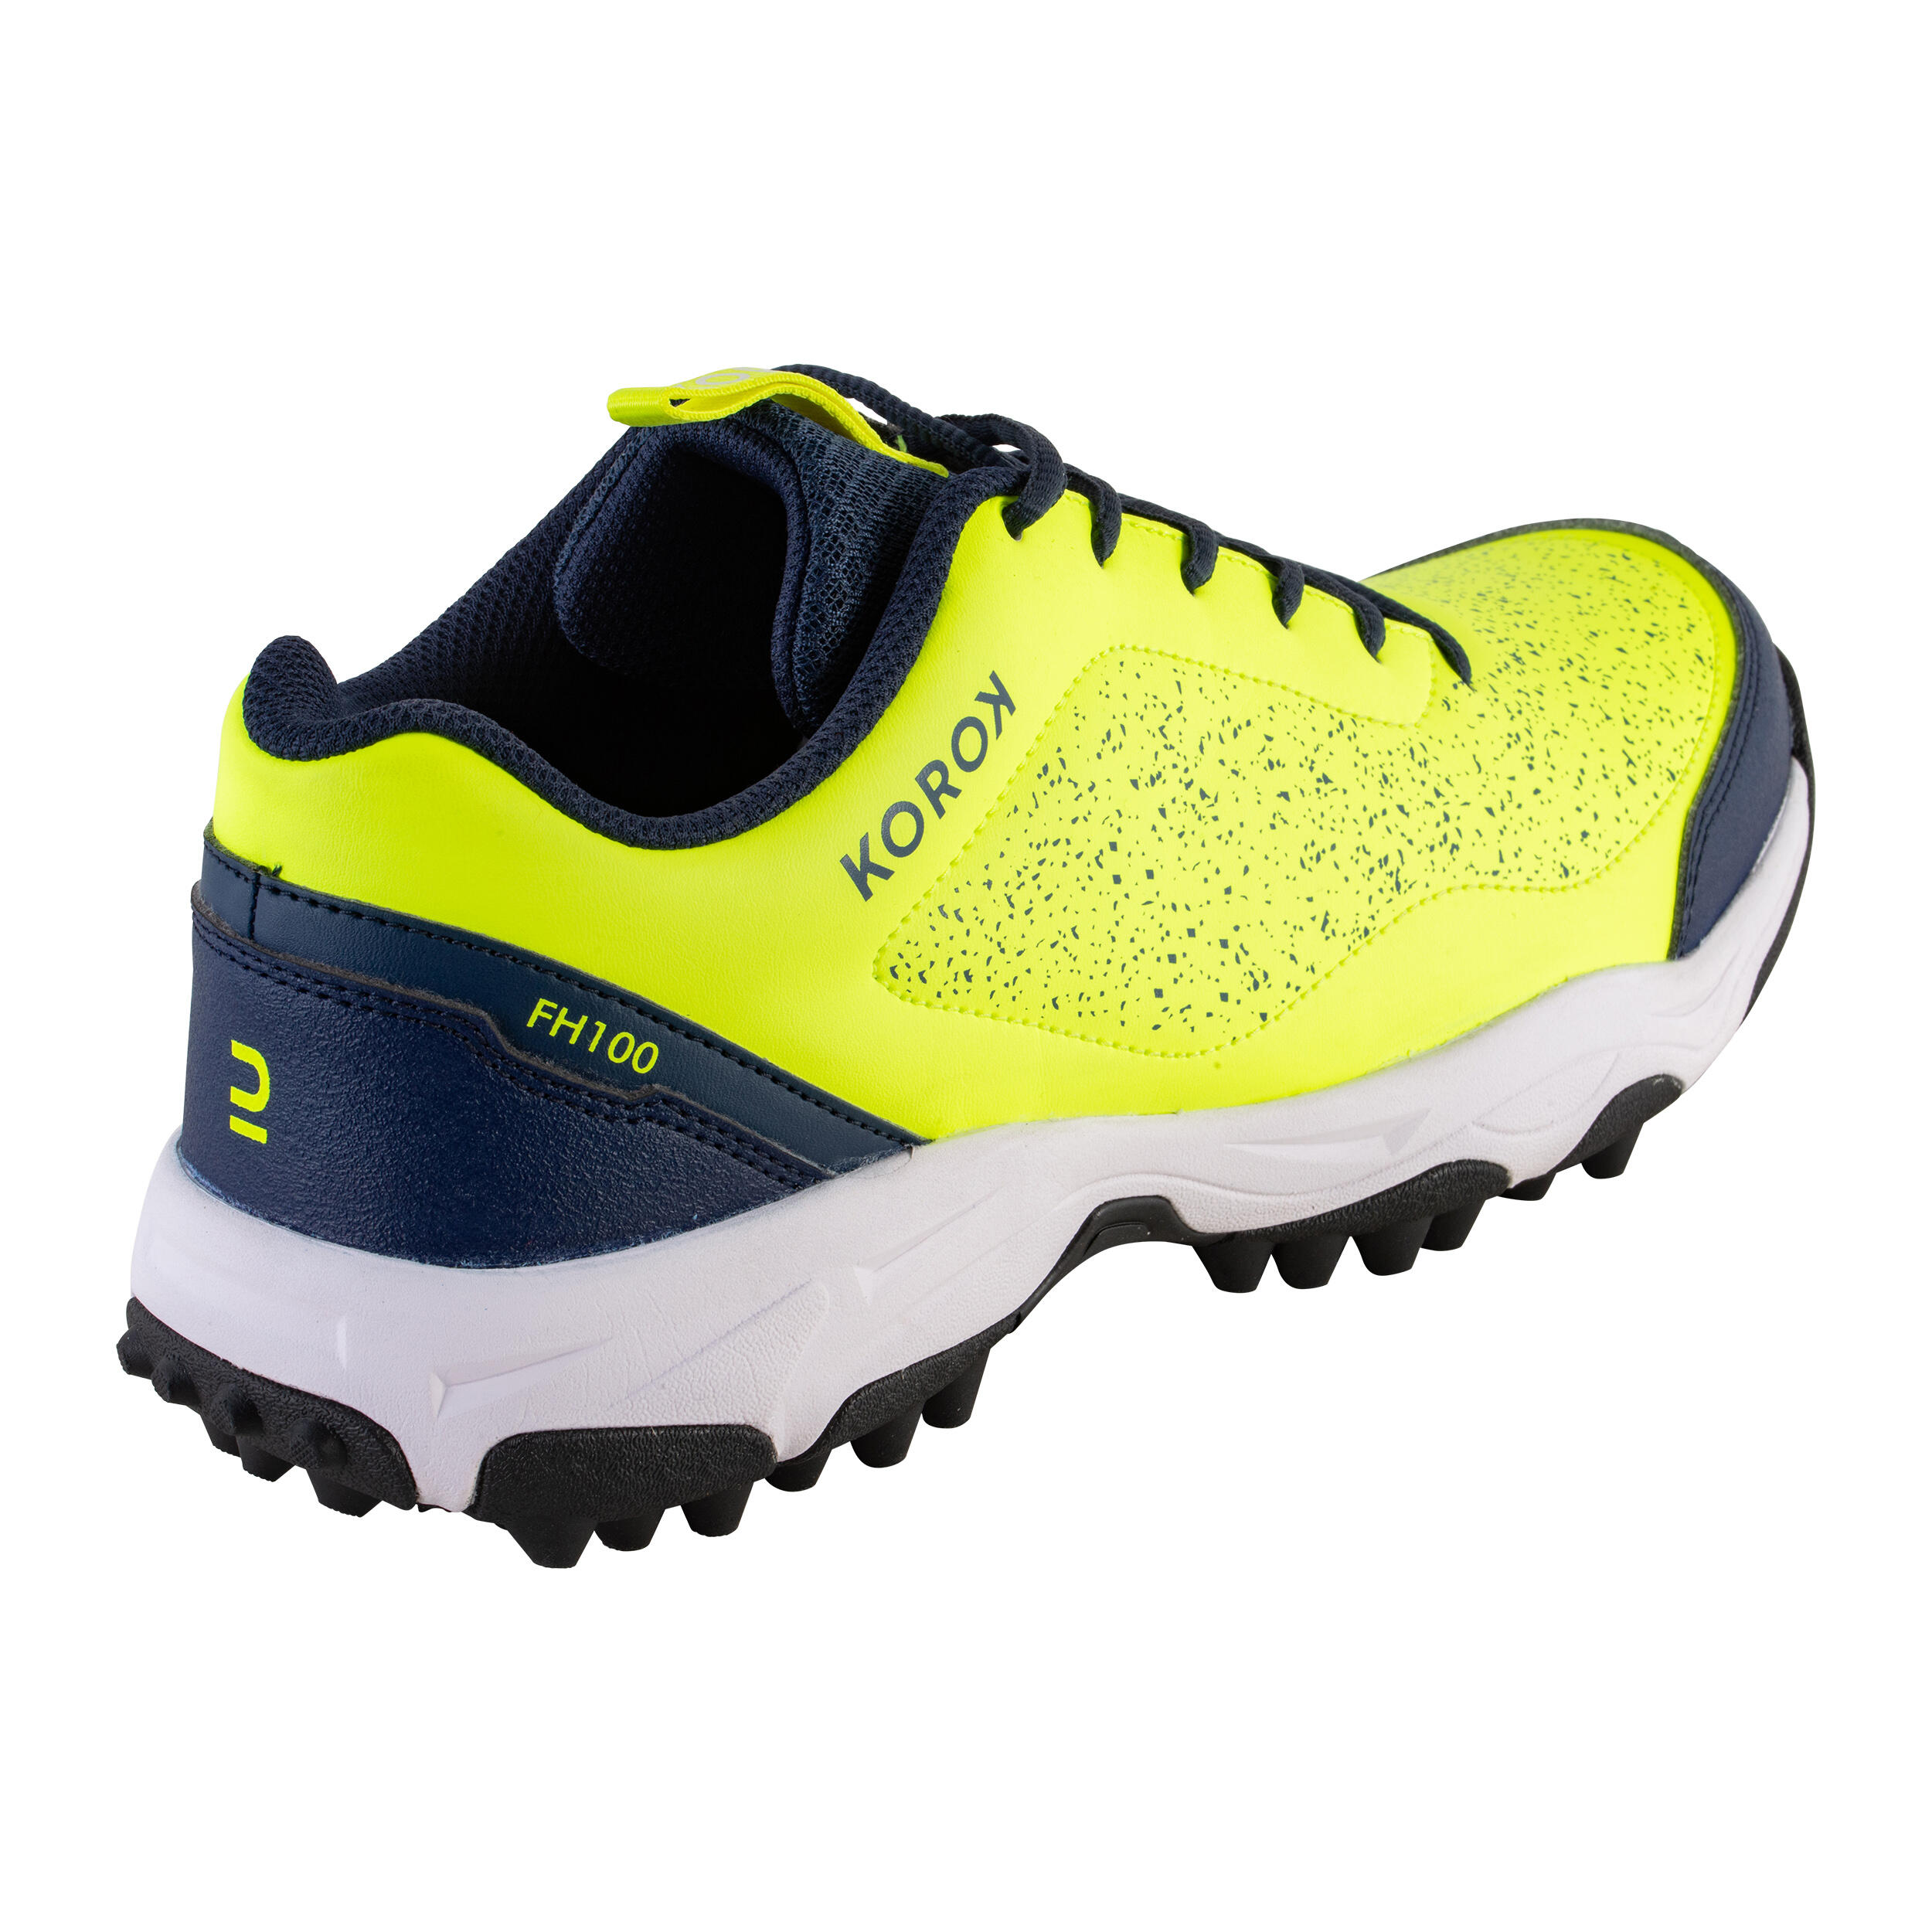 Adult Low Intensity Field Hockey Shoes FH100 - Yellow/Blue 5/7